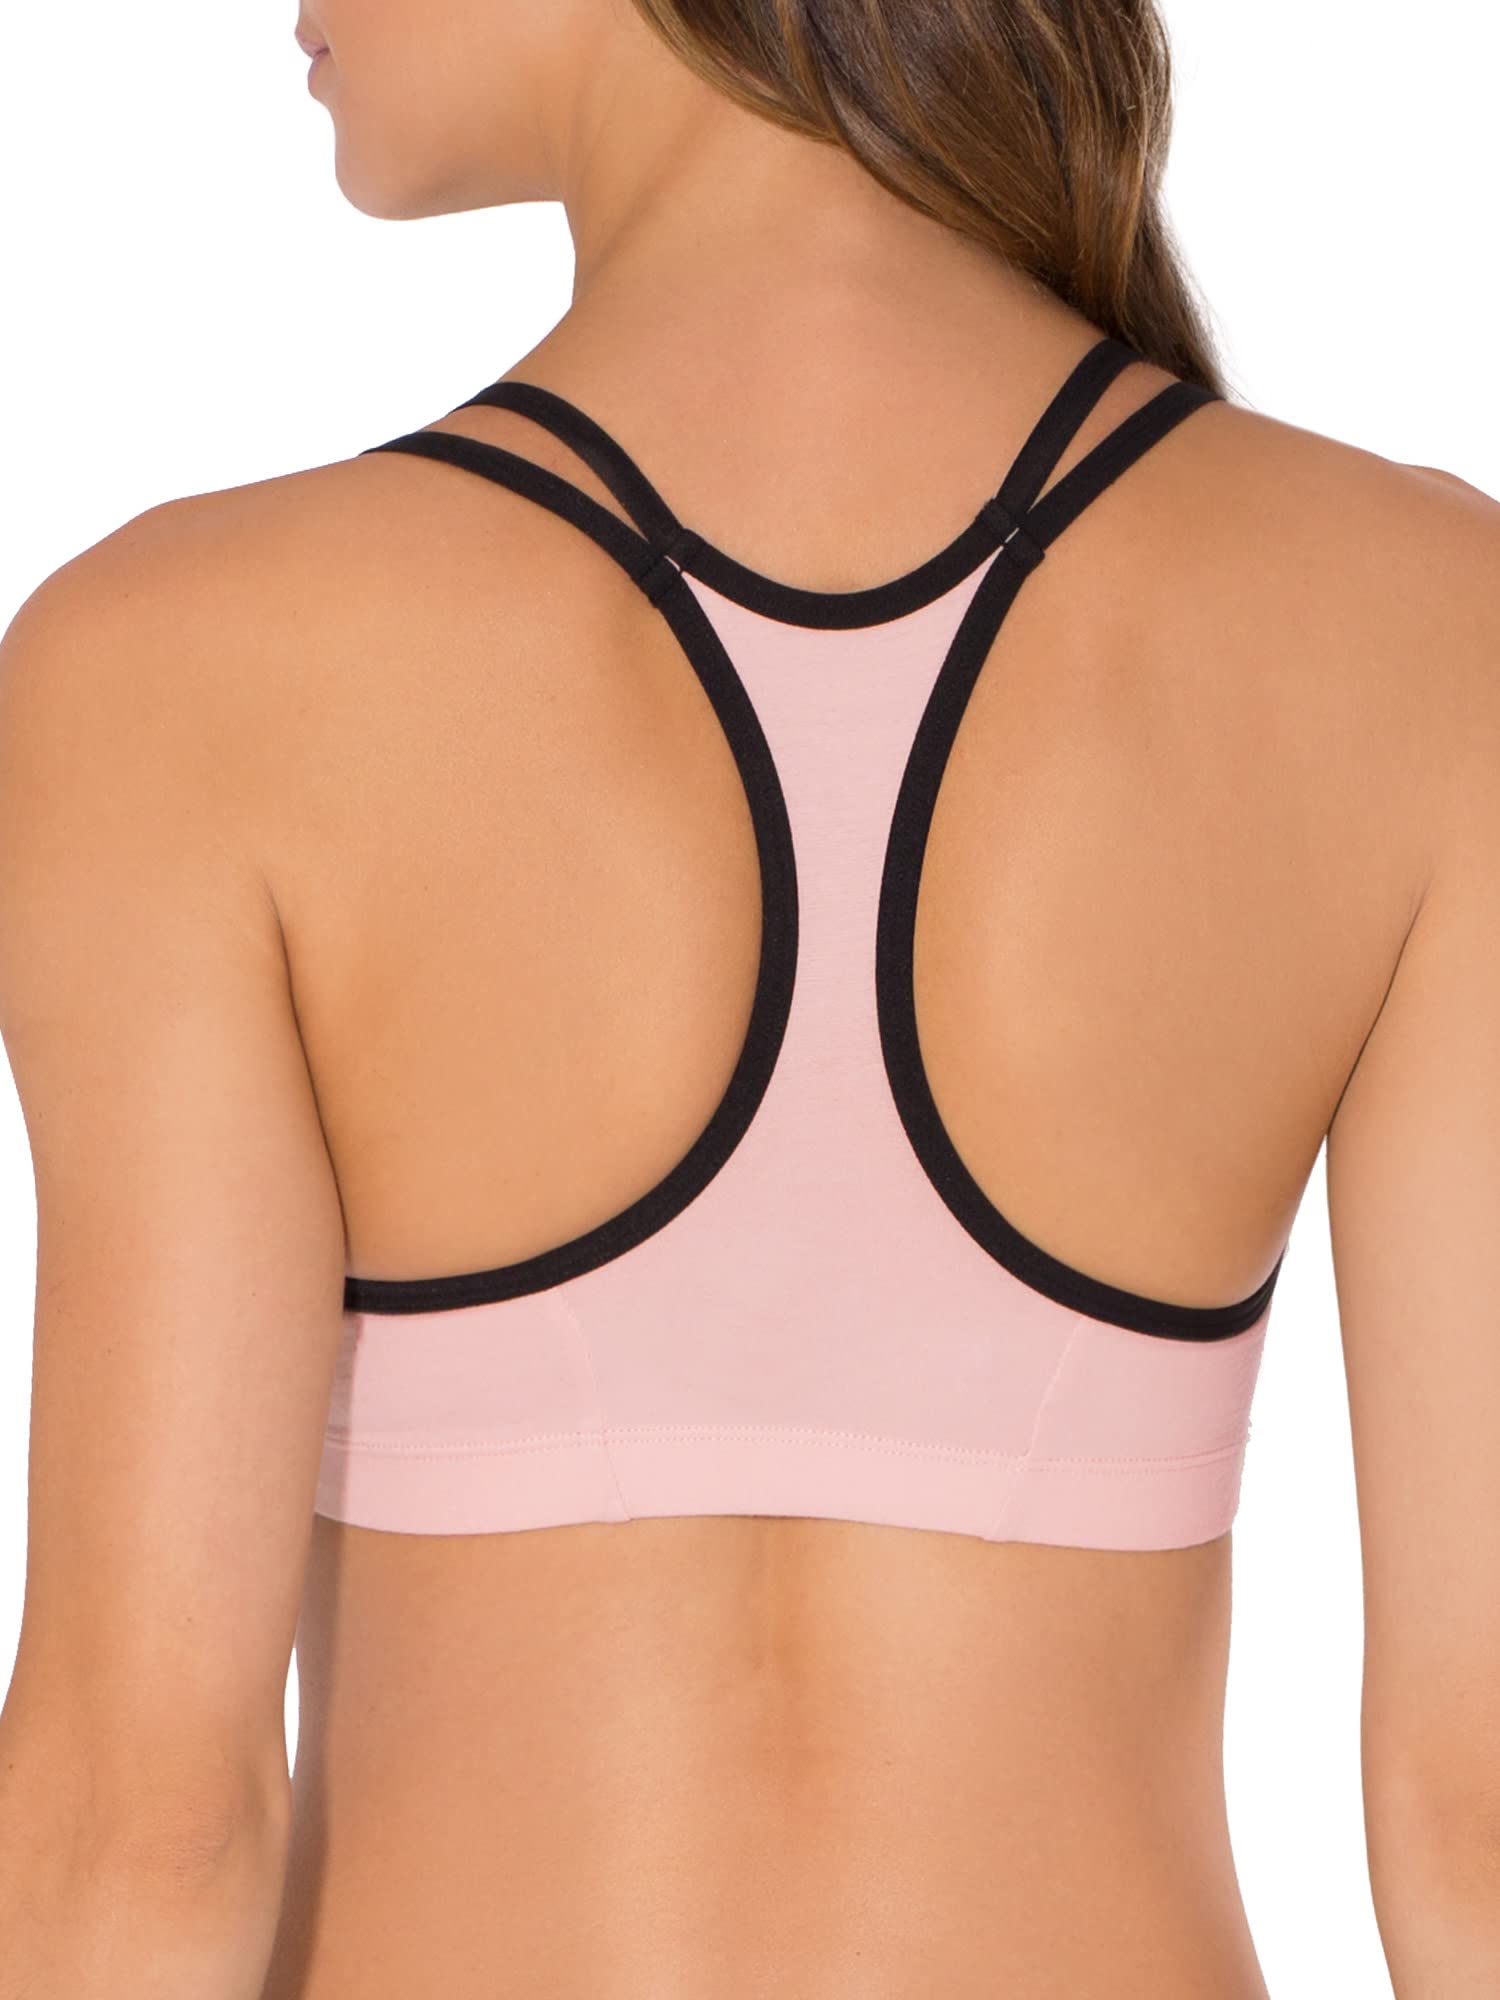 Fruit of The Loom Women's Spaghetti Strap Cotton Pull Over 3 Pack Sports Bra